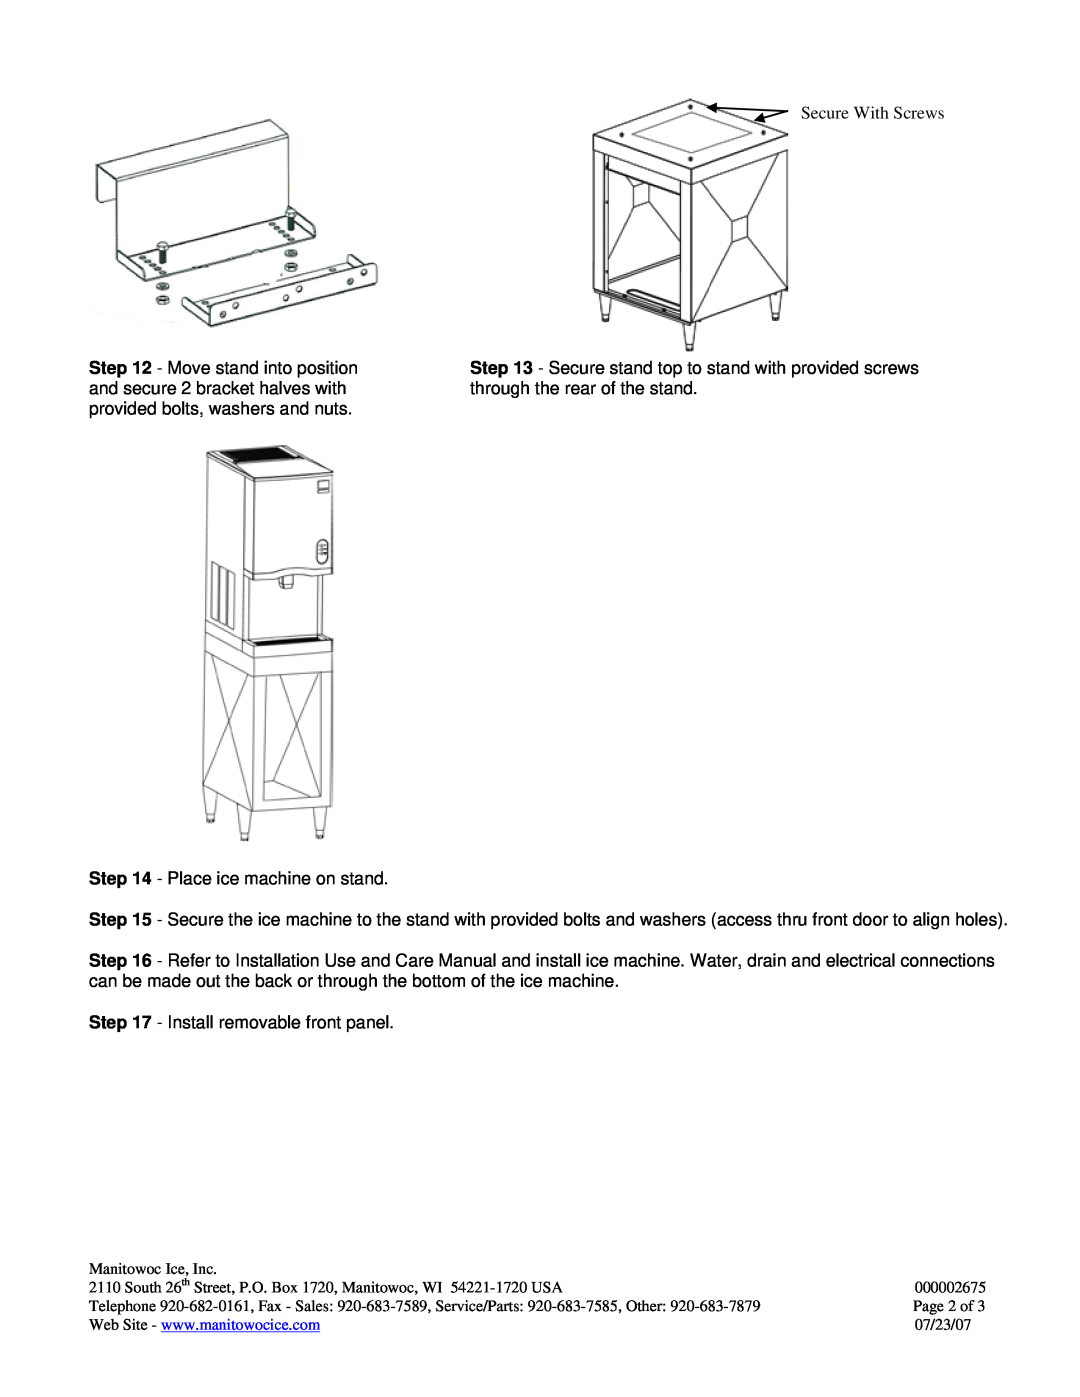 Manitowoc Ice K00384 installation instructions Place ice machine on stand 